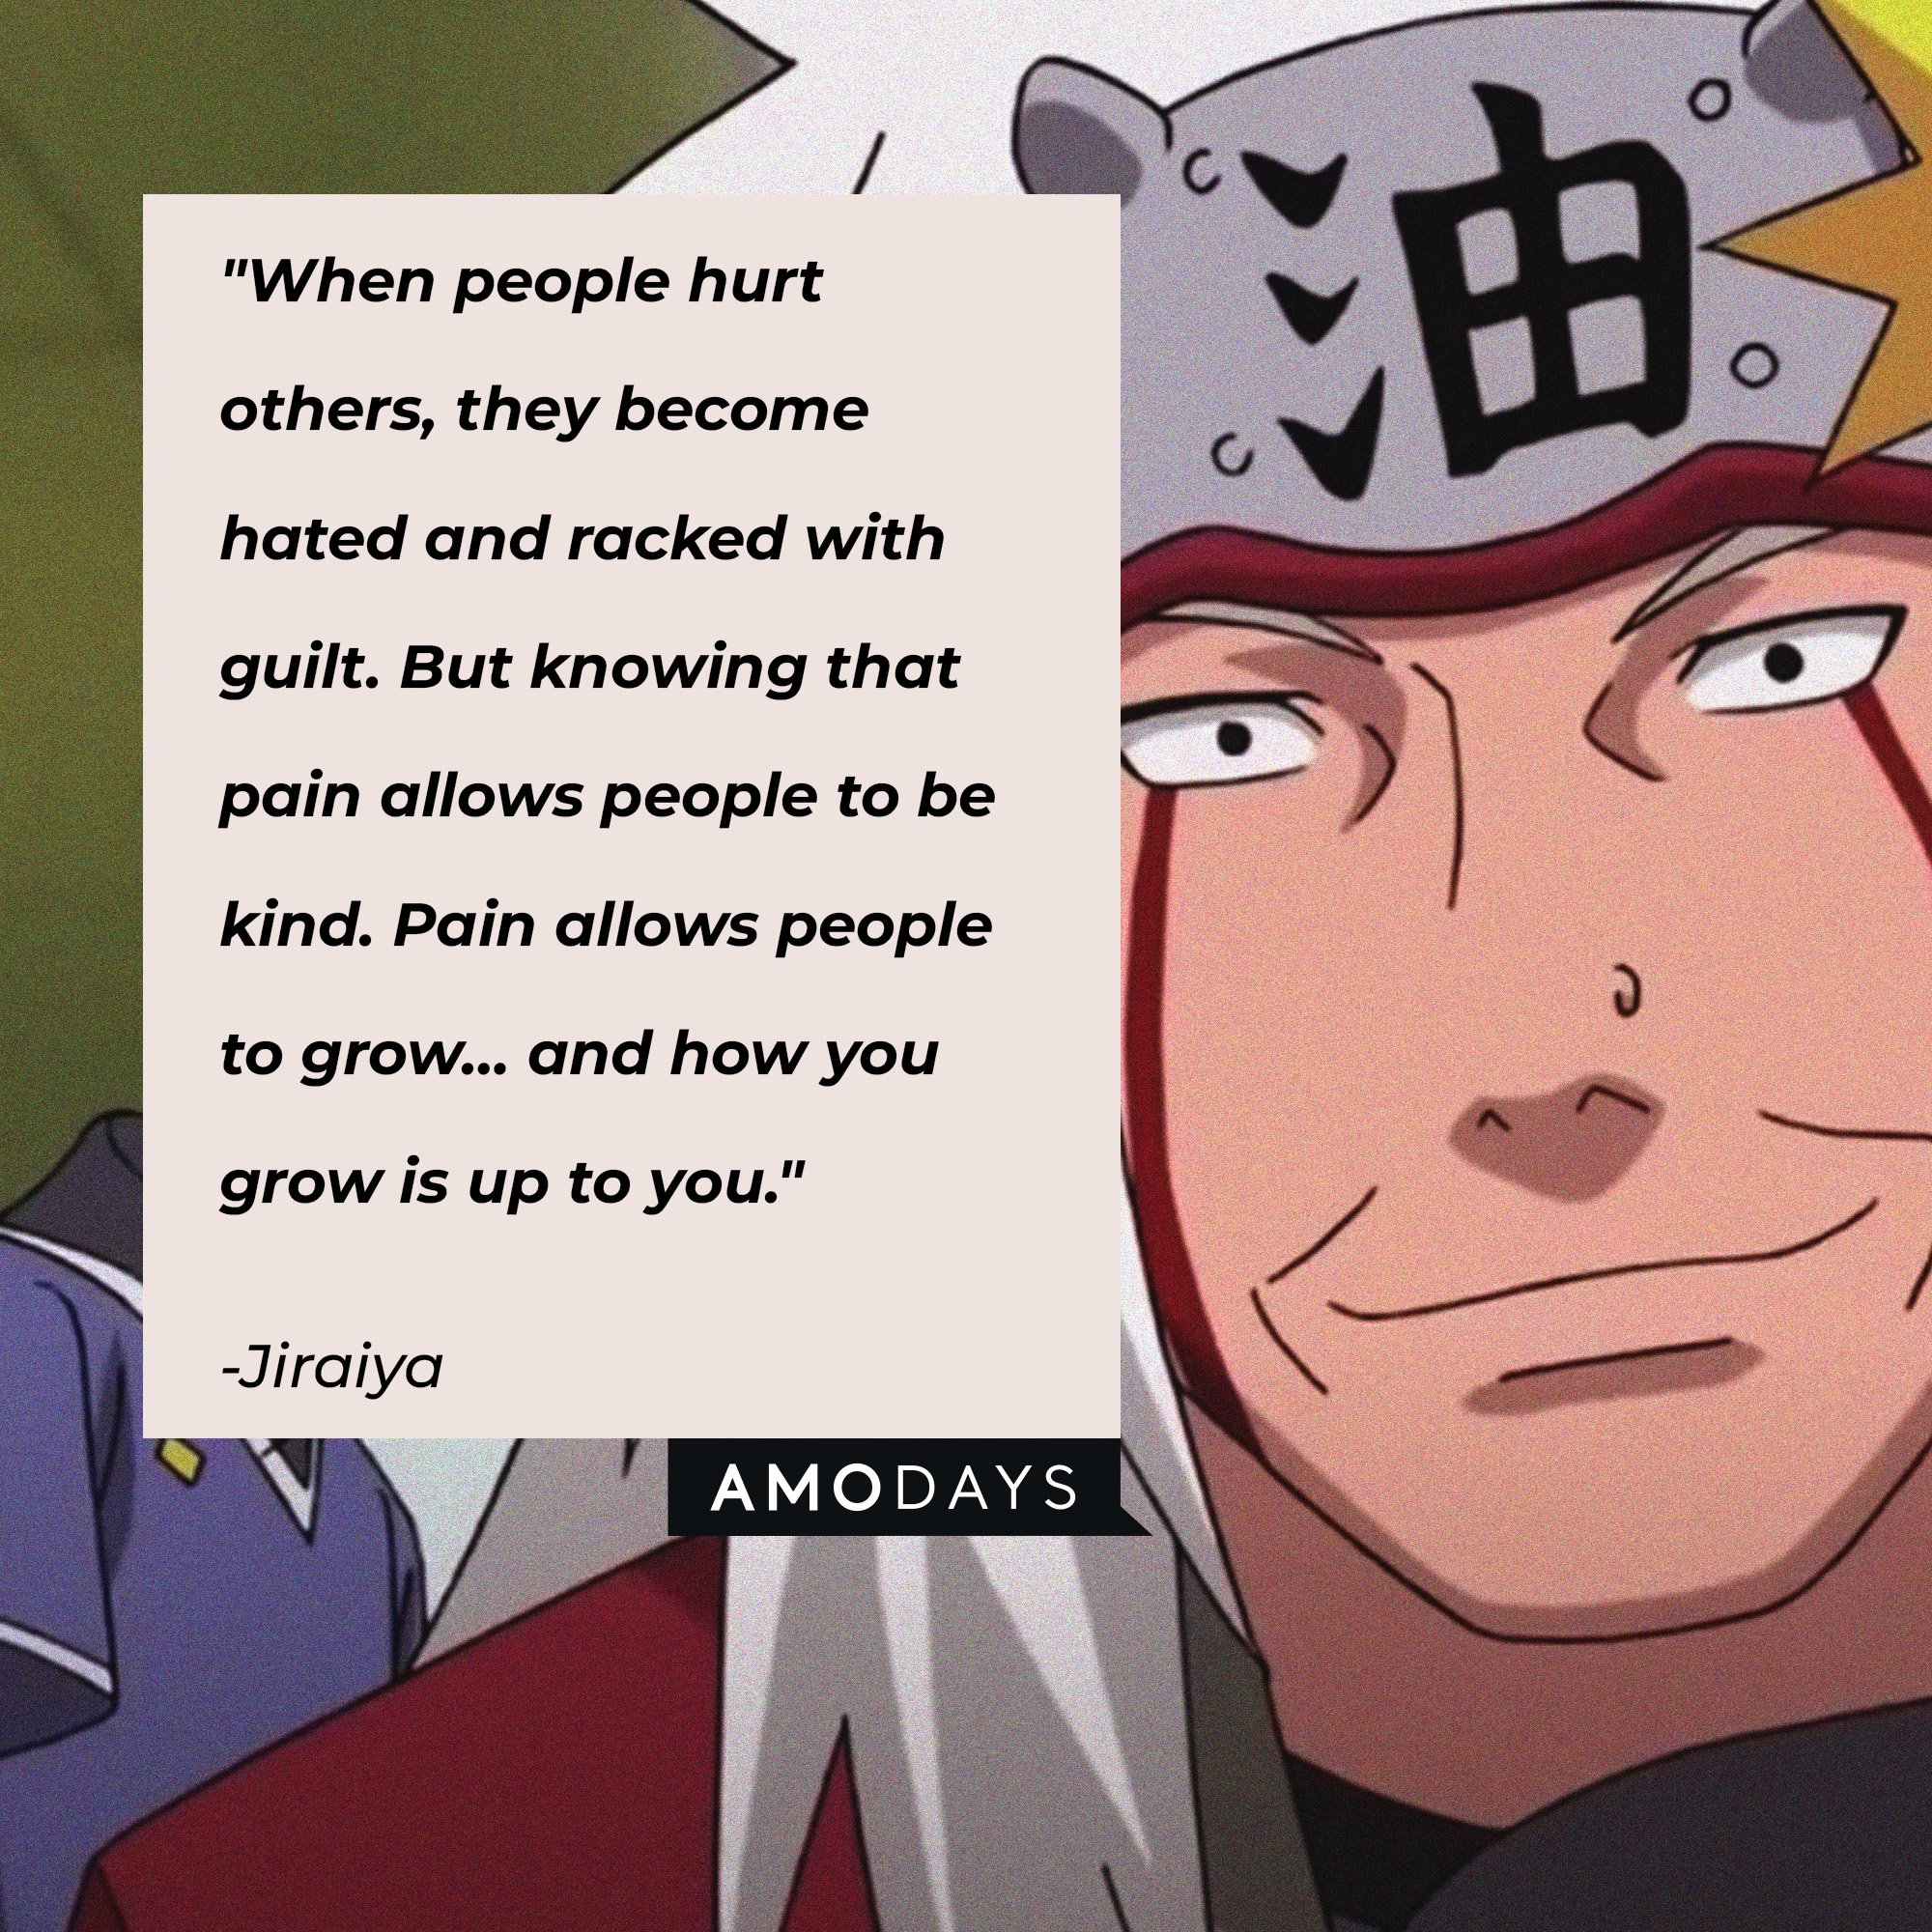 Jiraiya's quote: "When people hurt others, they become hated and racked with guilt. But knowing that pain allows people to be kind. Pain allows people to grow… and how you grow is up to you." | Image: AmoDays